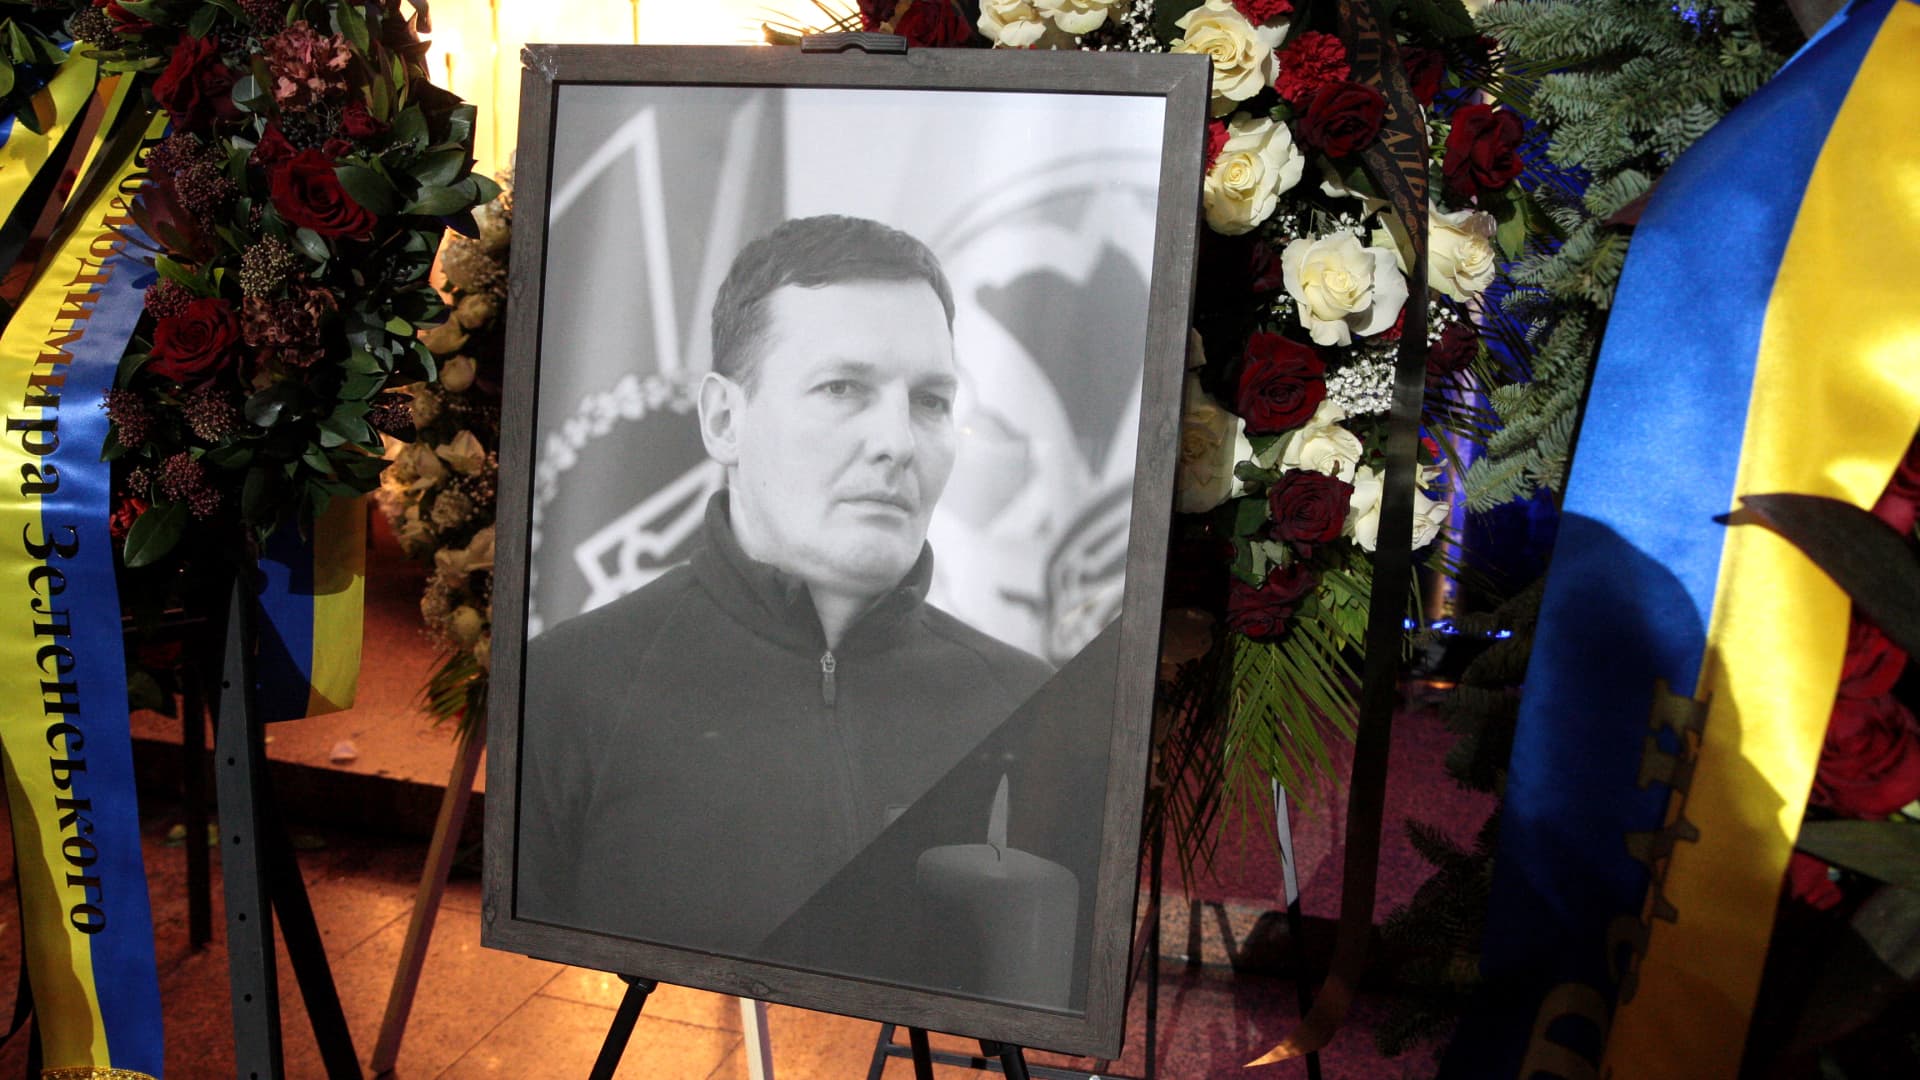 The portrait of late First Deputy Minister of Internal Affairs of Ukraine Yevhenii Yenin is pictured during the lying-in-state ceremony of the leadership of the Ukrainian Ministry of Internal Affairs who perished in the Brovary helicopter crash at the Ukrainian House, Kyiv, capital of Ukraine.